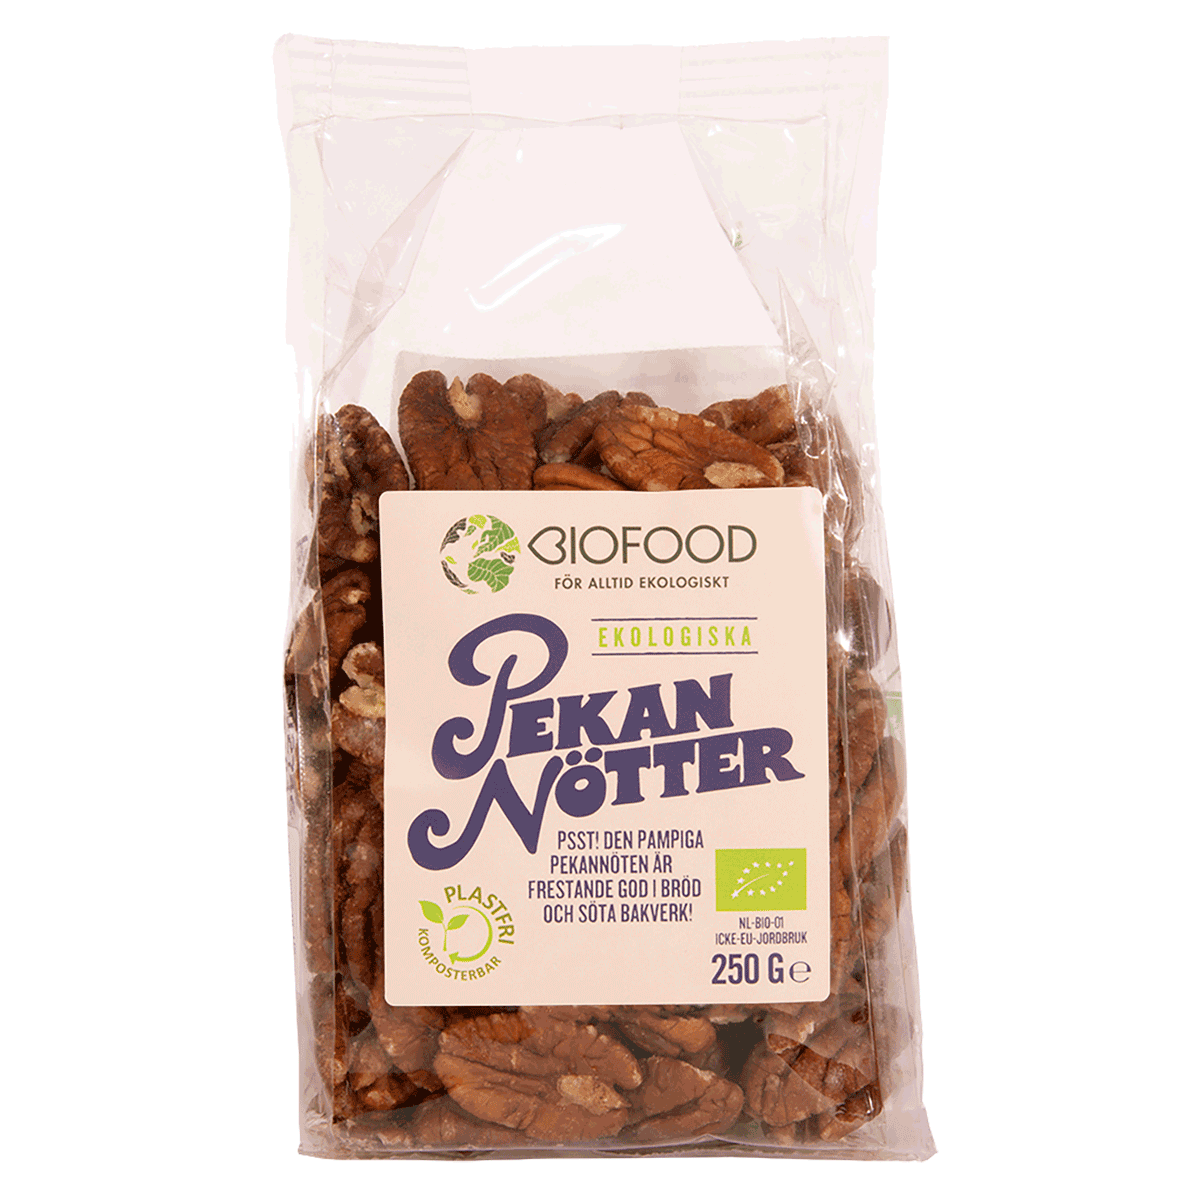 Pecans from Biofood